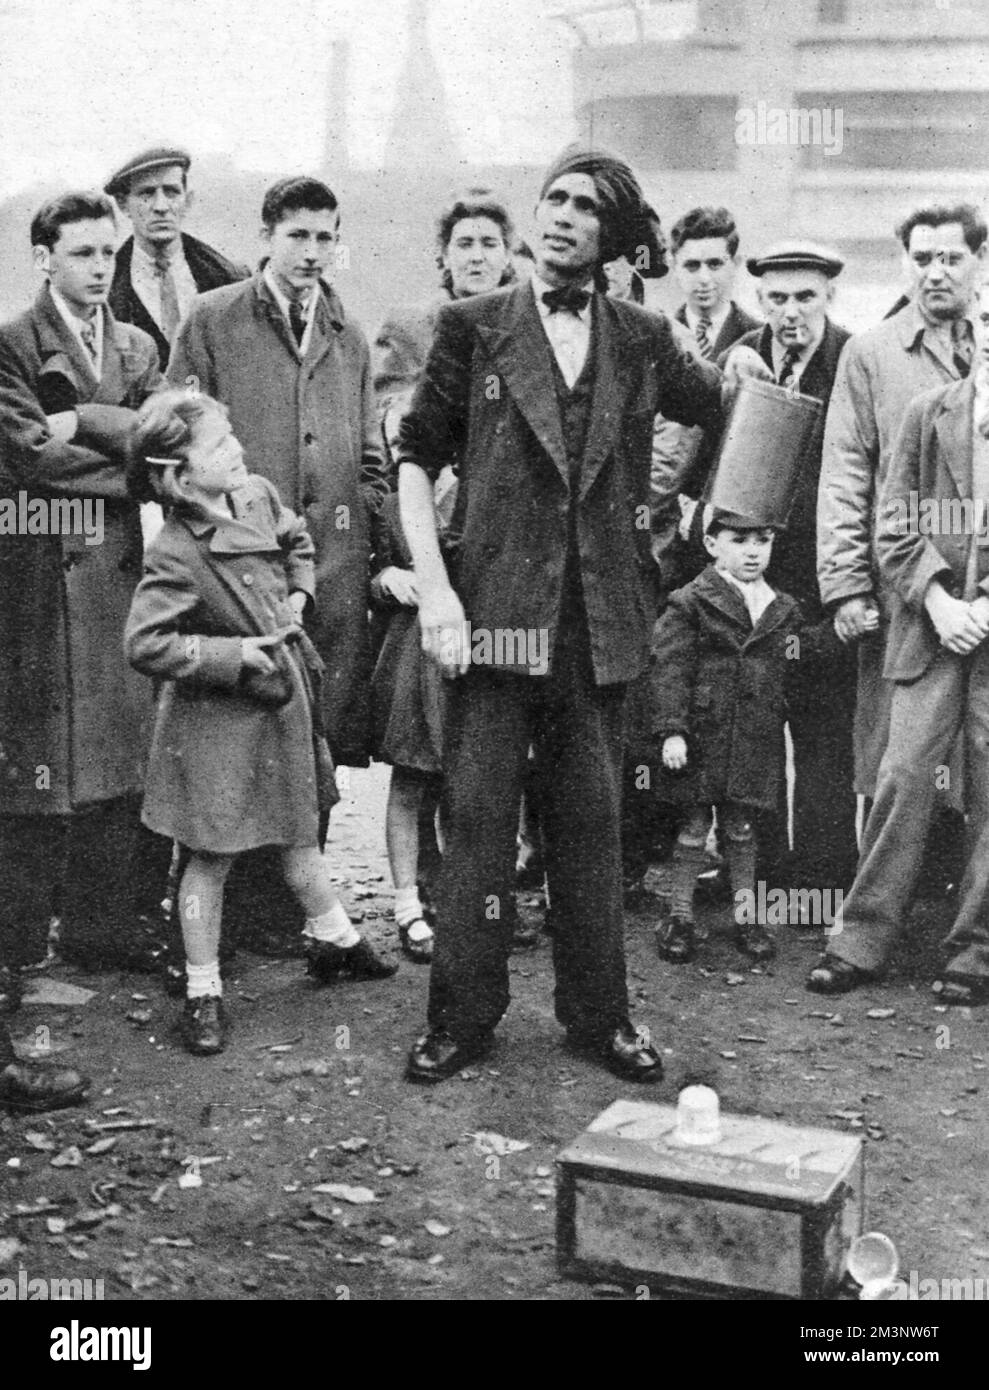 At Petticoat Lane, the London market, a young girl gazes up at a street performer wearing a turban who appears to be in the middle of a conjuring trick. The rest of the onlookers don't look quite so impressed.     Date: 1945 Stock Photo